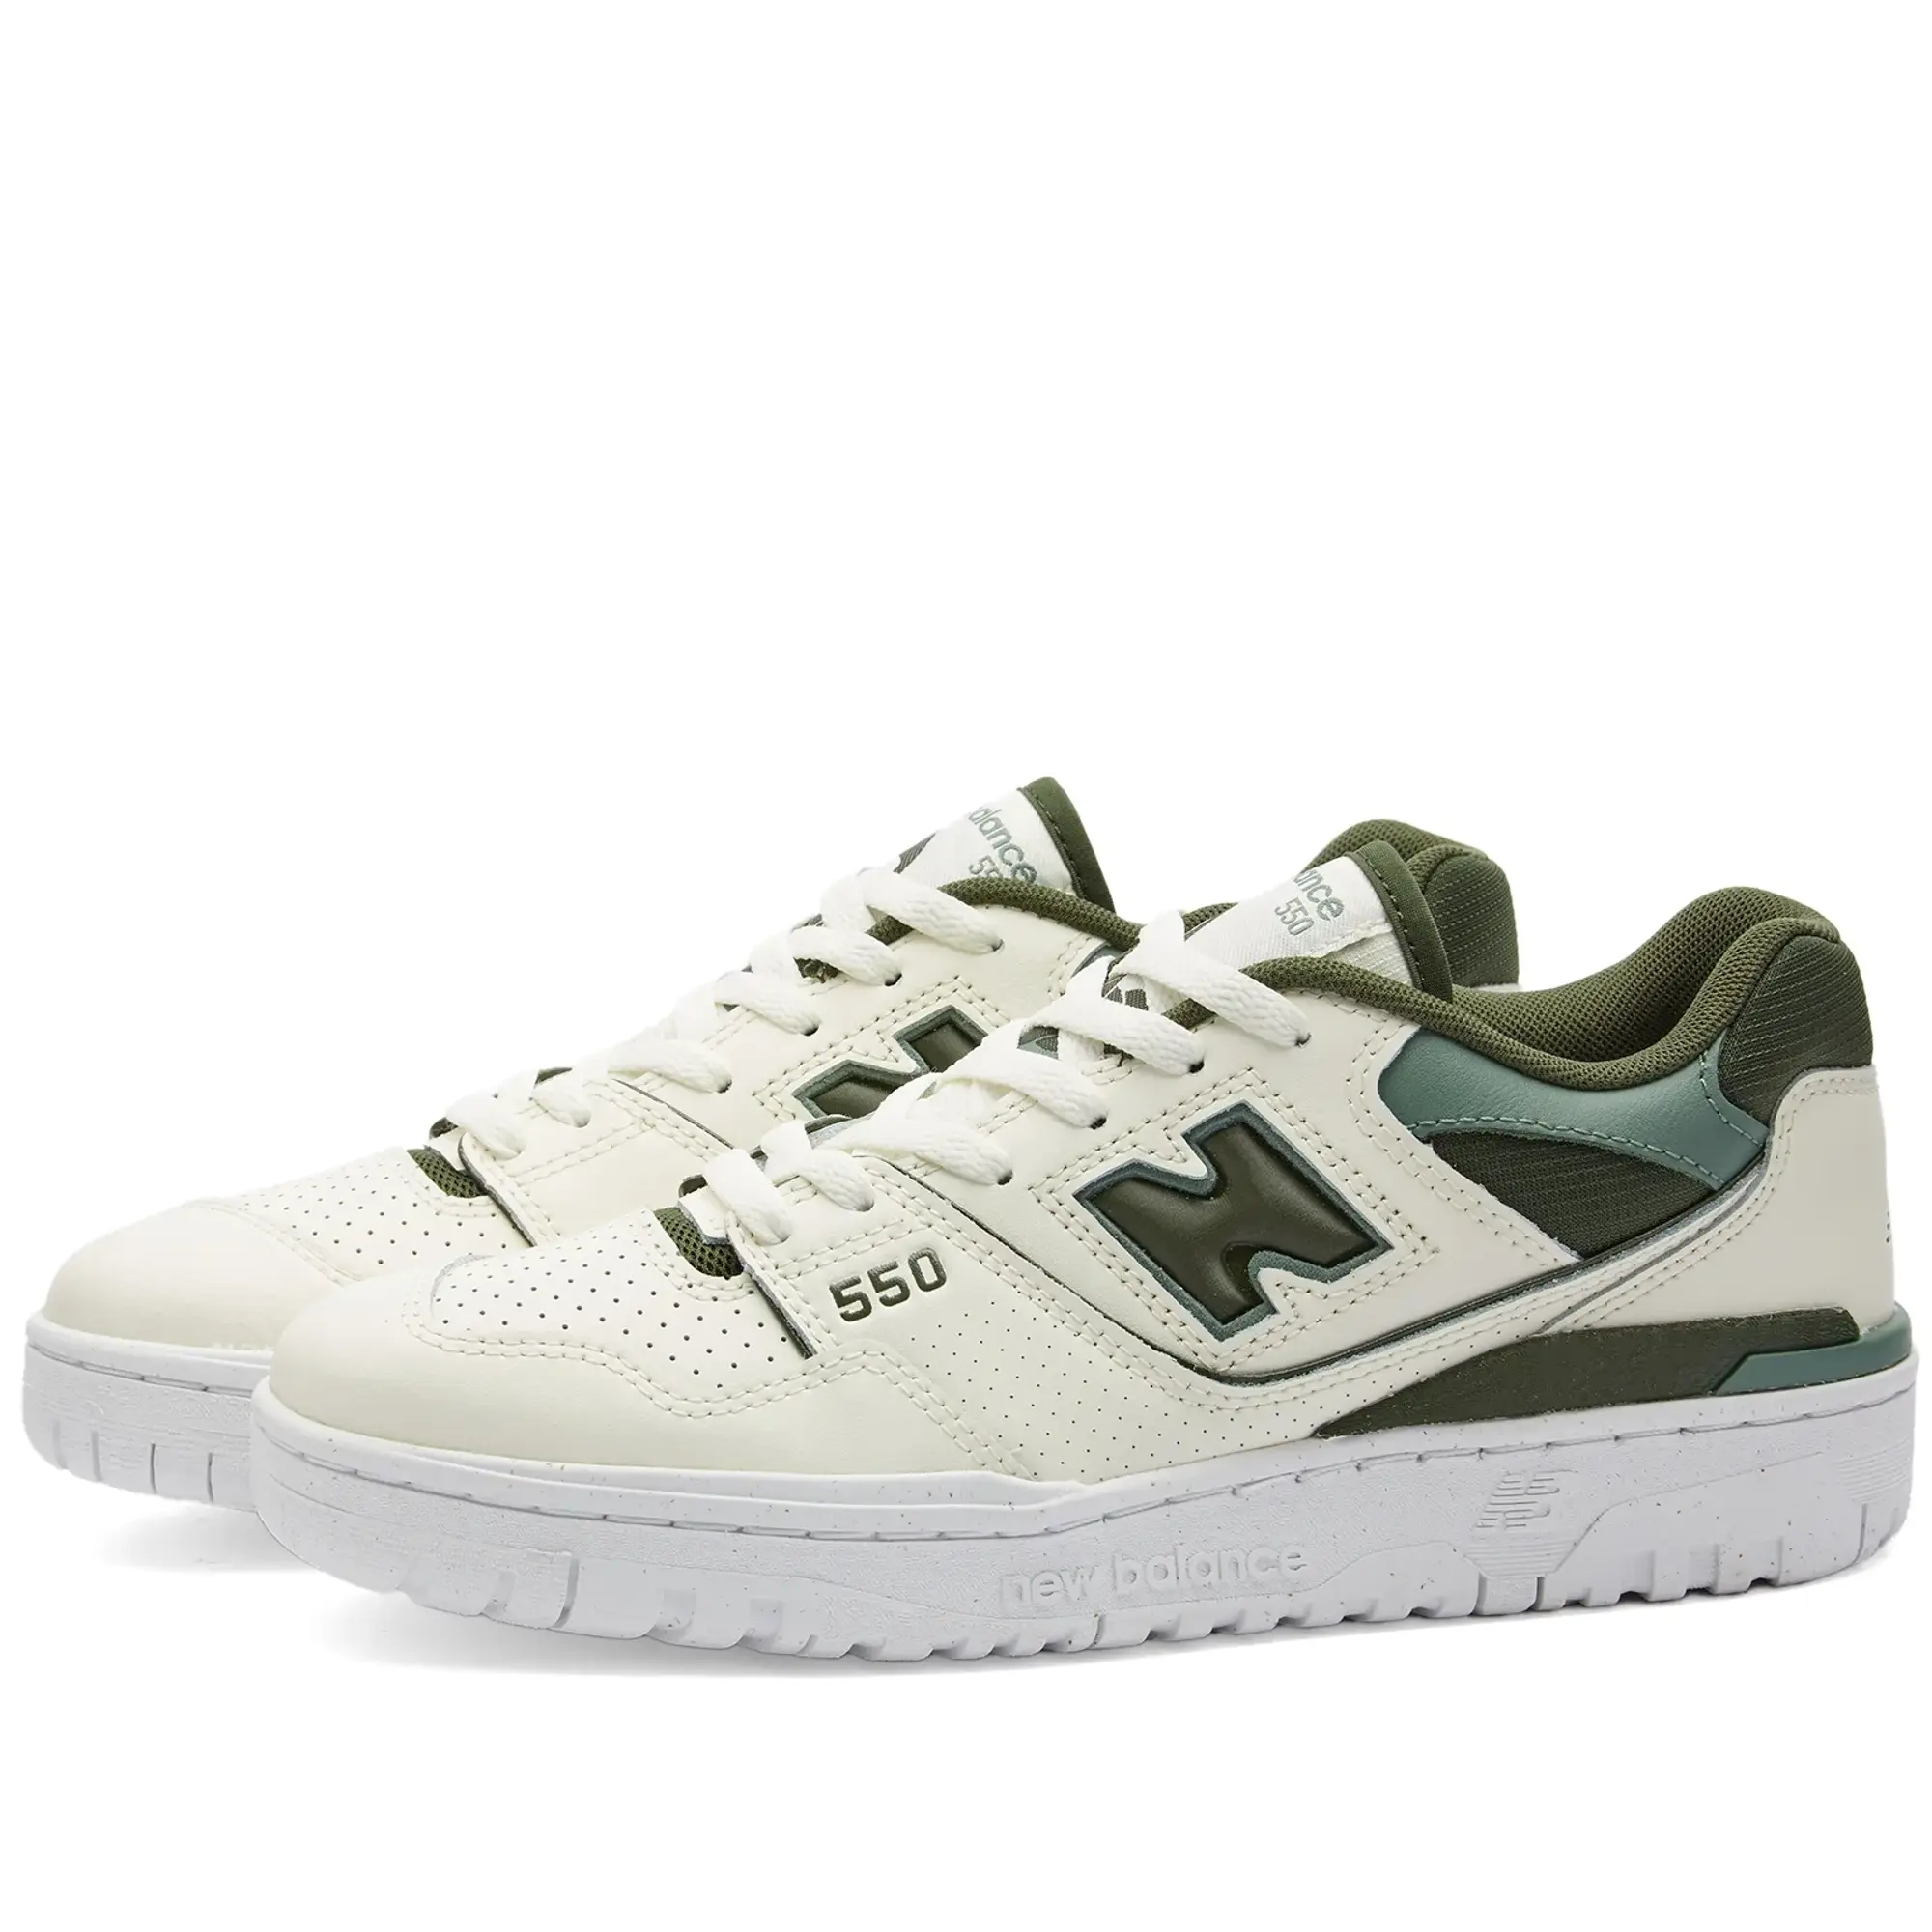 New Balance Womens 550 Trainer - Off White / Forest Green / Angora